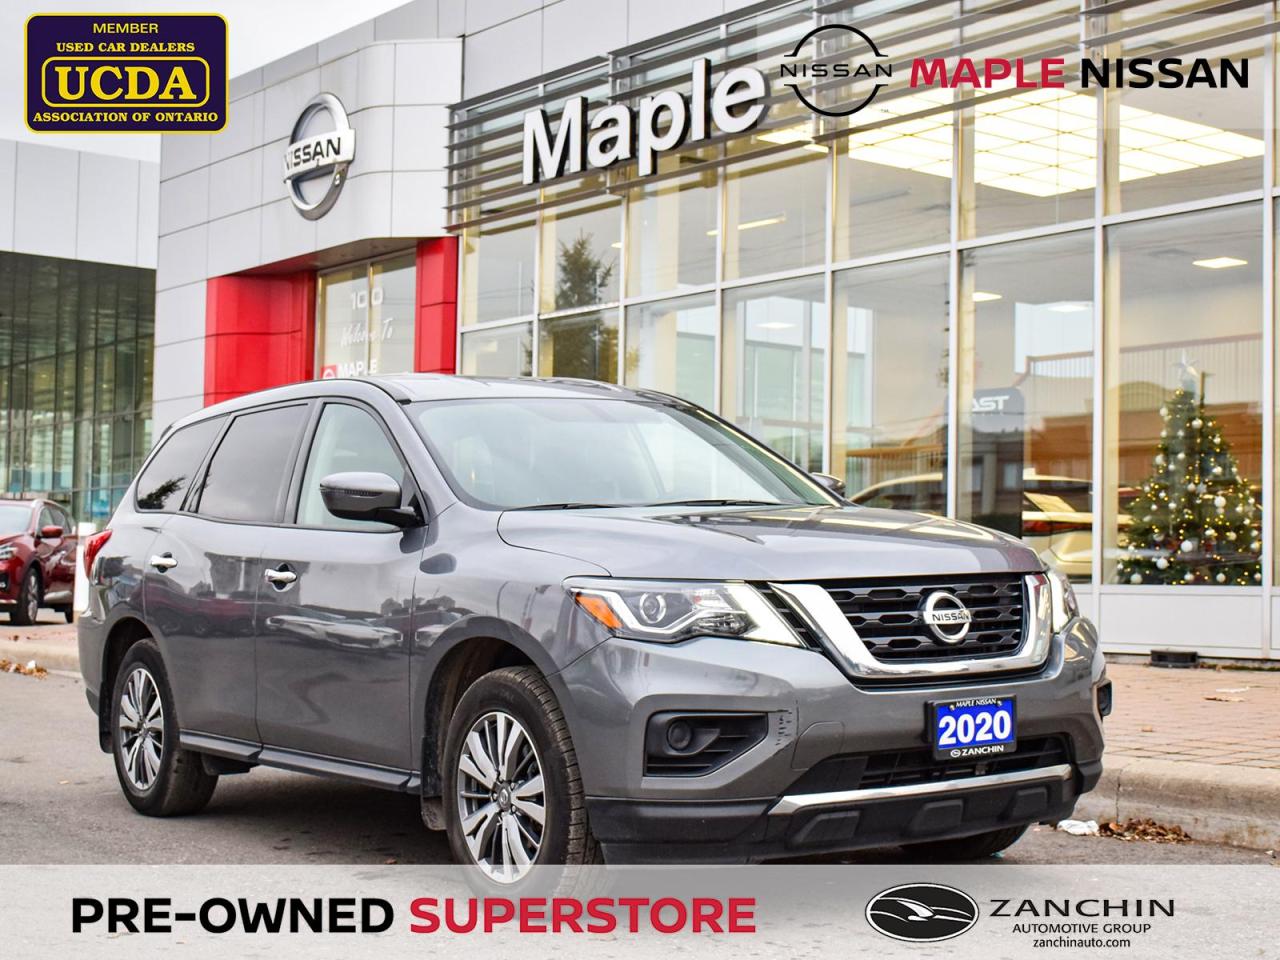 Used 2020 Nissan Pathfinder S 4WD, Bluetooth, Rear Sonar, Rear View Monitor  for Sale in Maple, Ontario